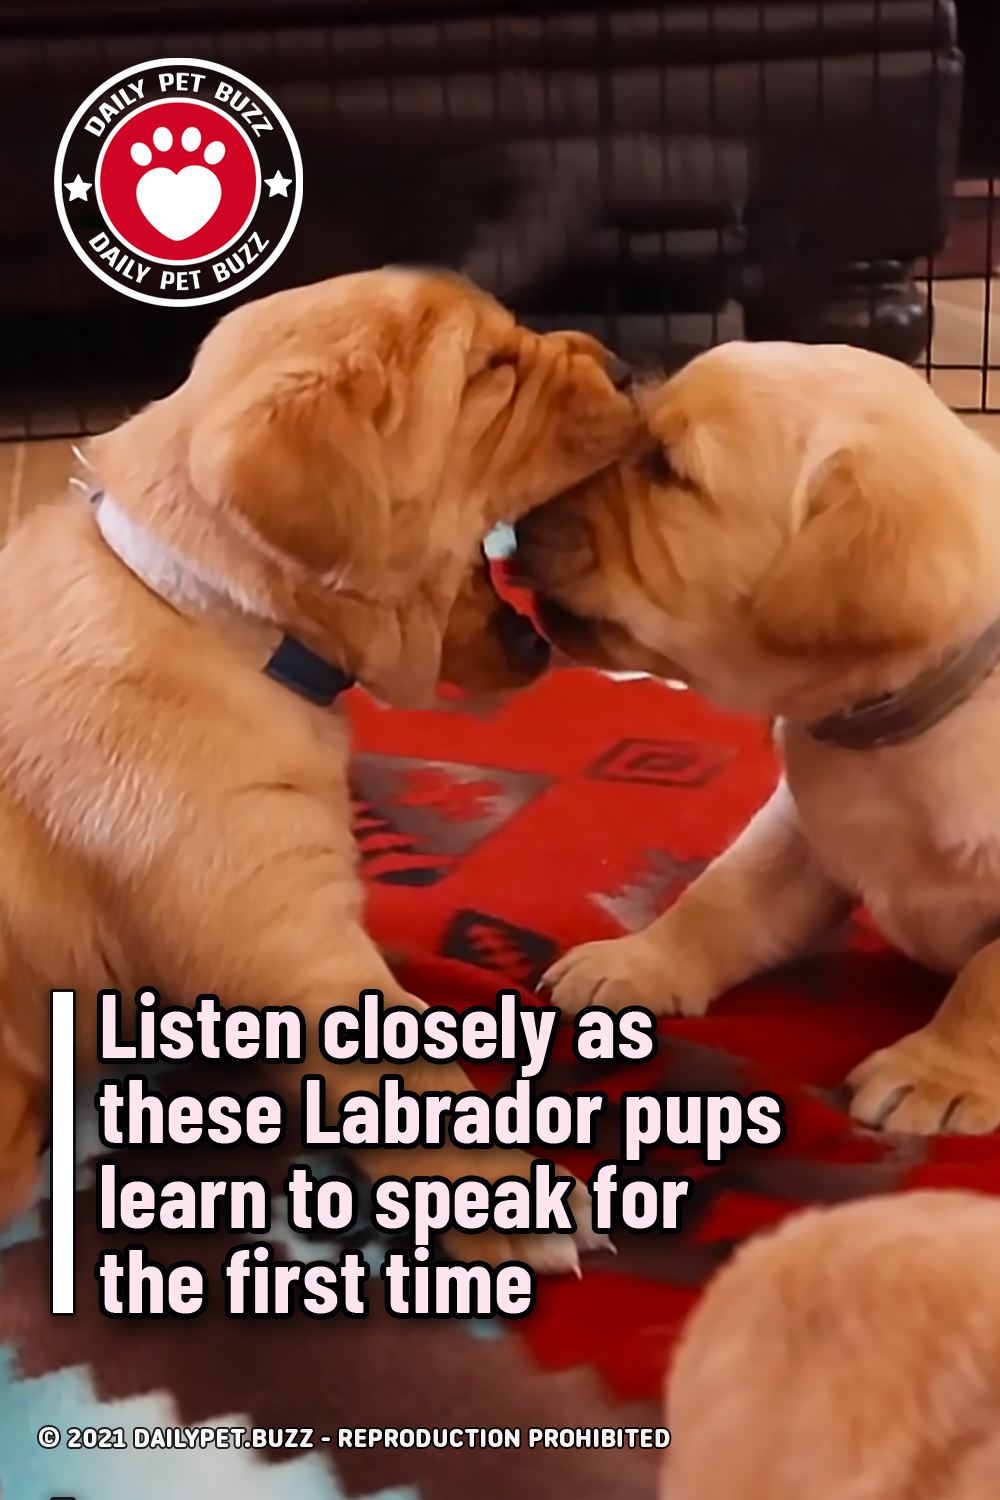 Listen closely as these Labrador pups learn to speak for the first time